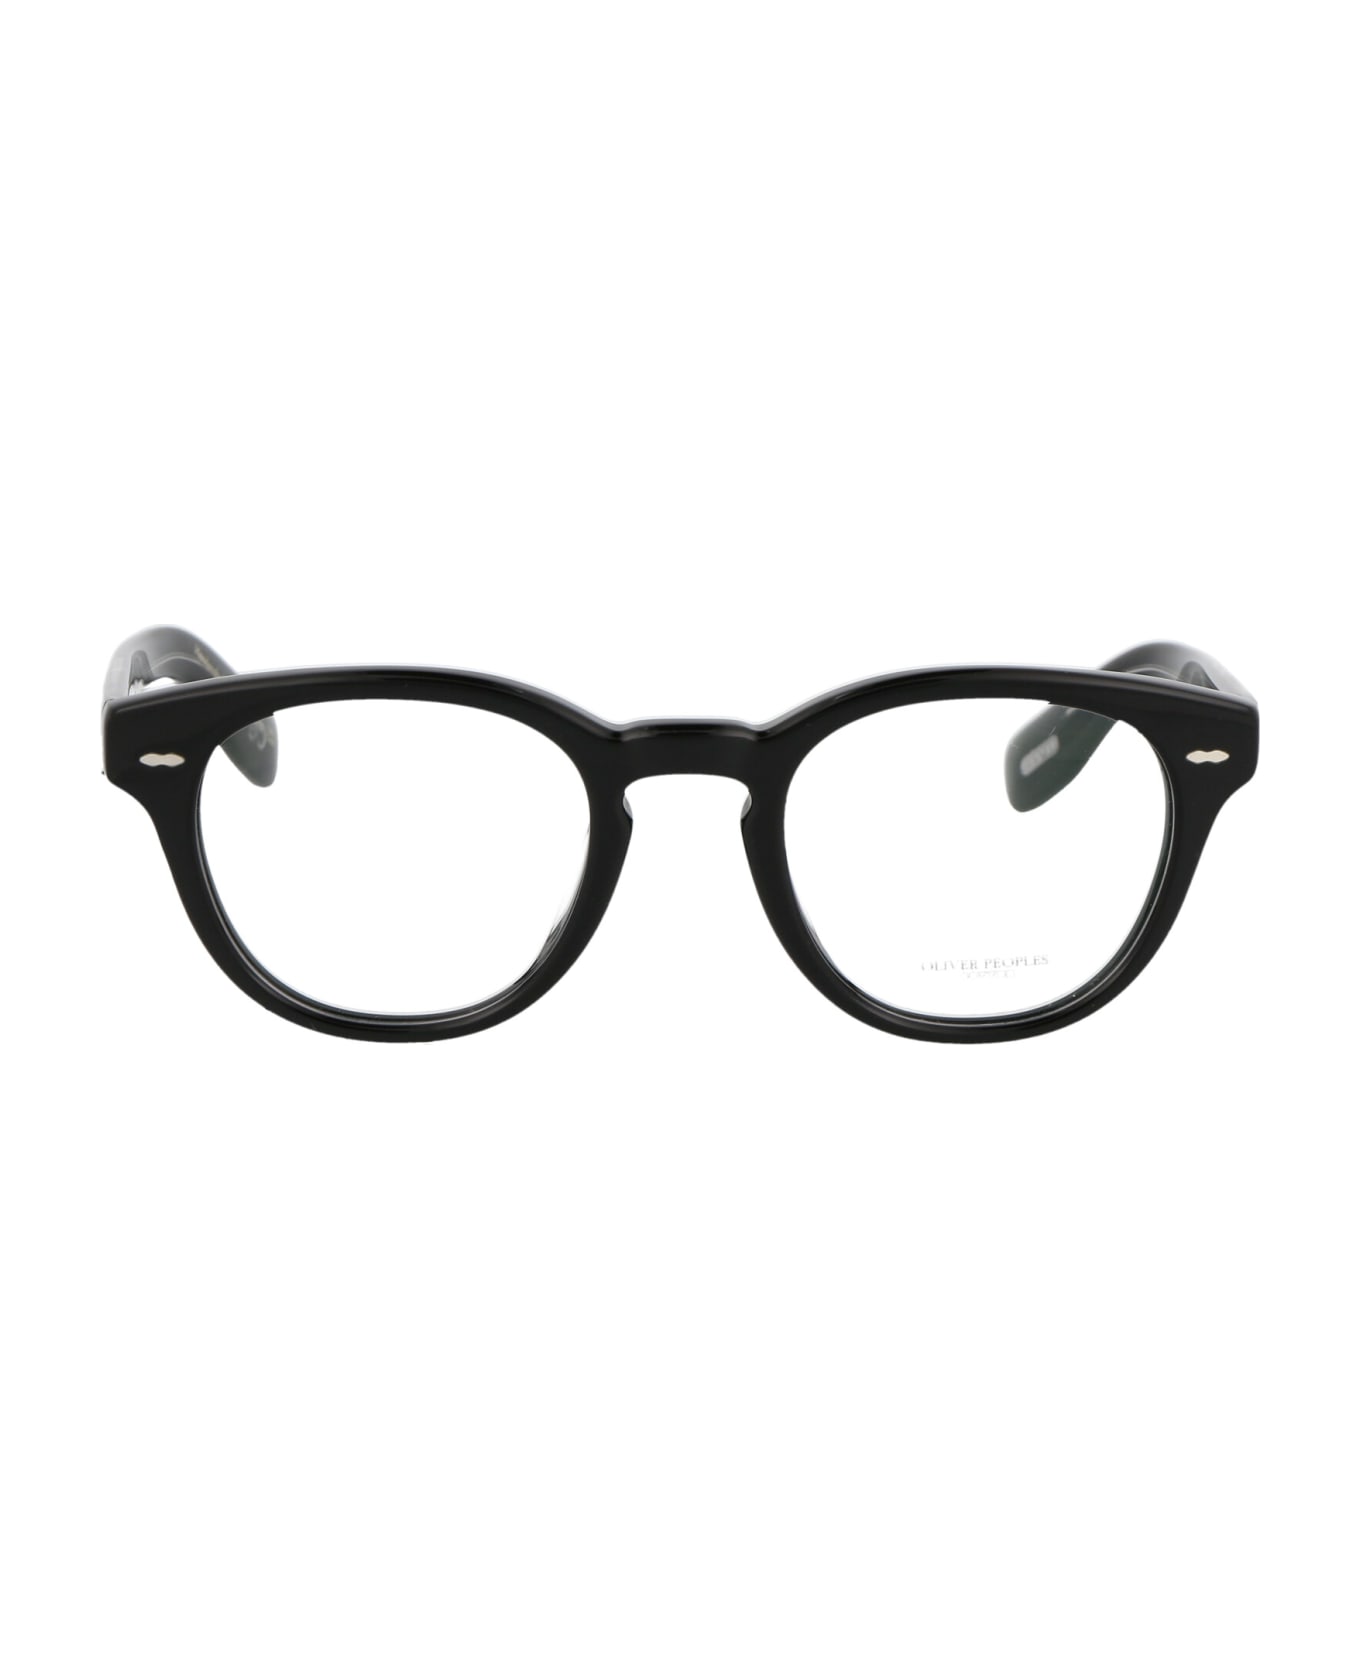 Oliver Peoples Cary Grant Glasses - 1492 Black